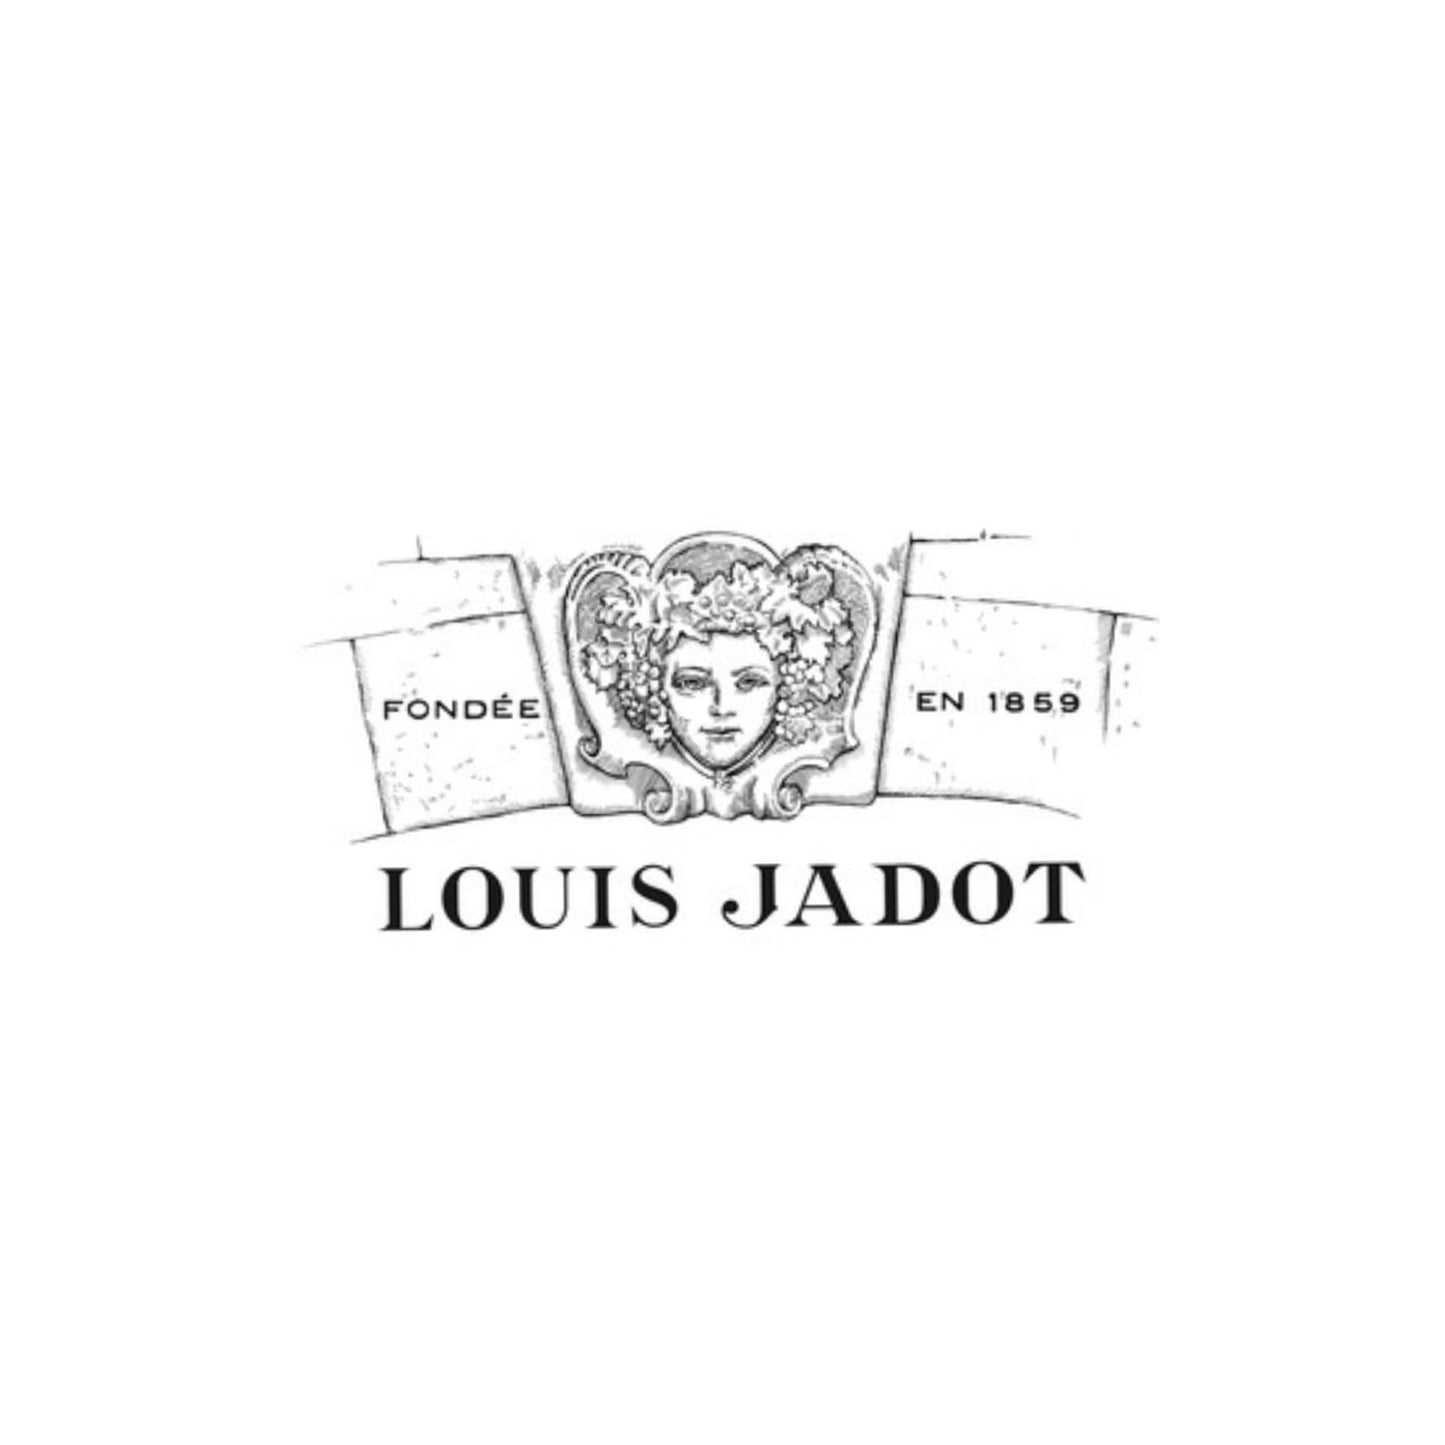 2009 Louis Jadot, Chambolle Musigny Les Amoureuses - Magnum 1.5L